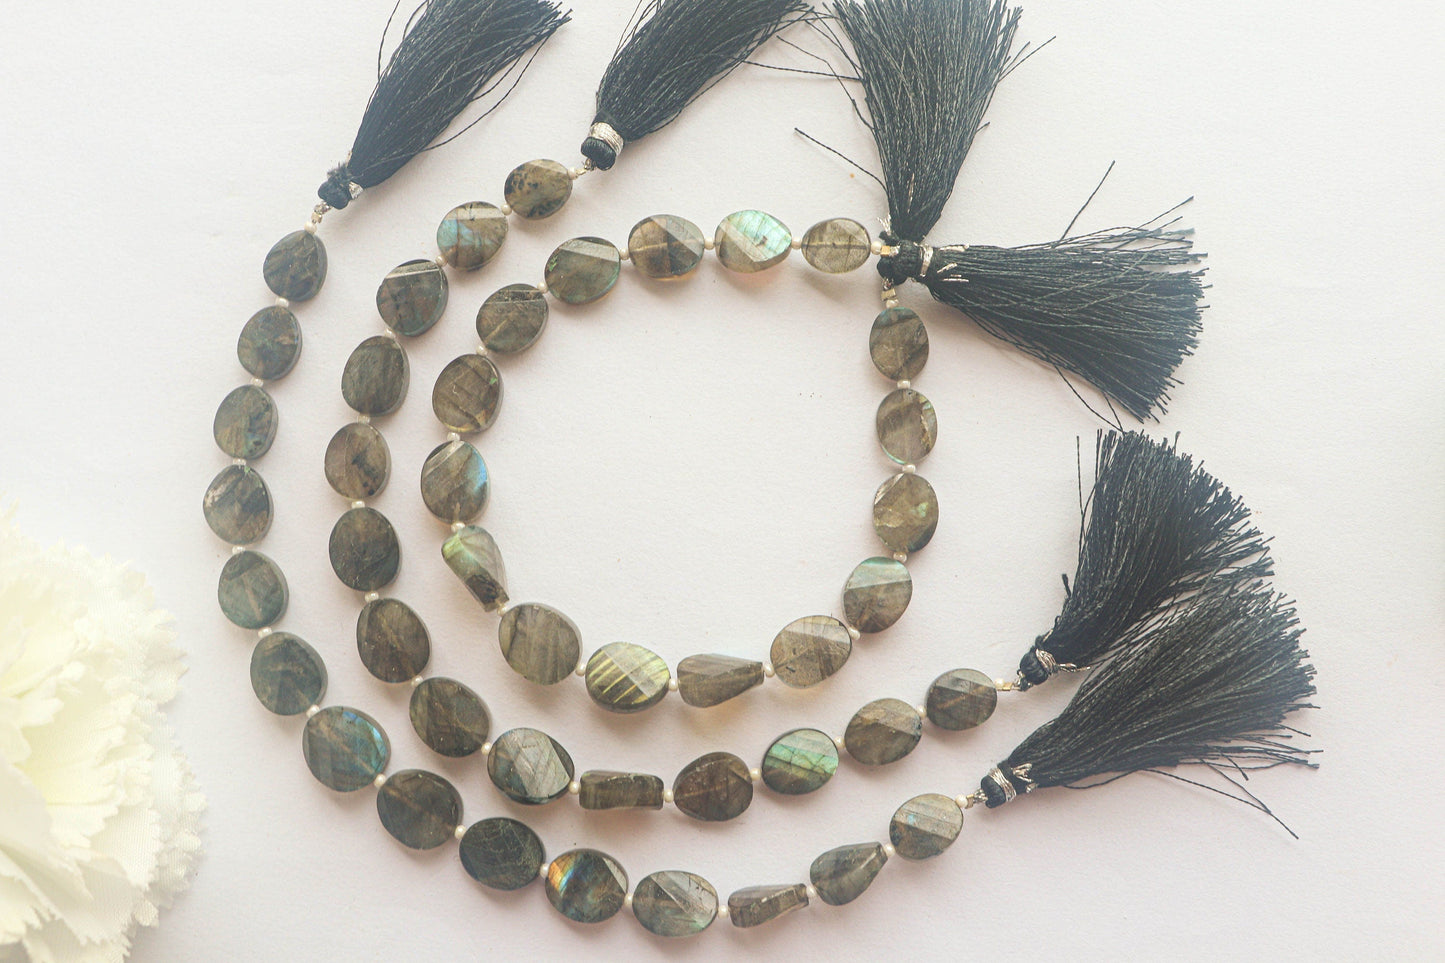 Labradorite Twisted Oval Shape Faceted Beads | 7 Inch String | Natural Labradorite | 14 Pieces String | Beadsforyourjewelry Beadsforyourjewelry